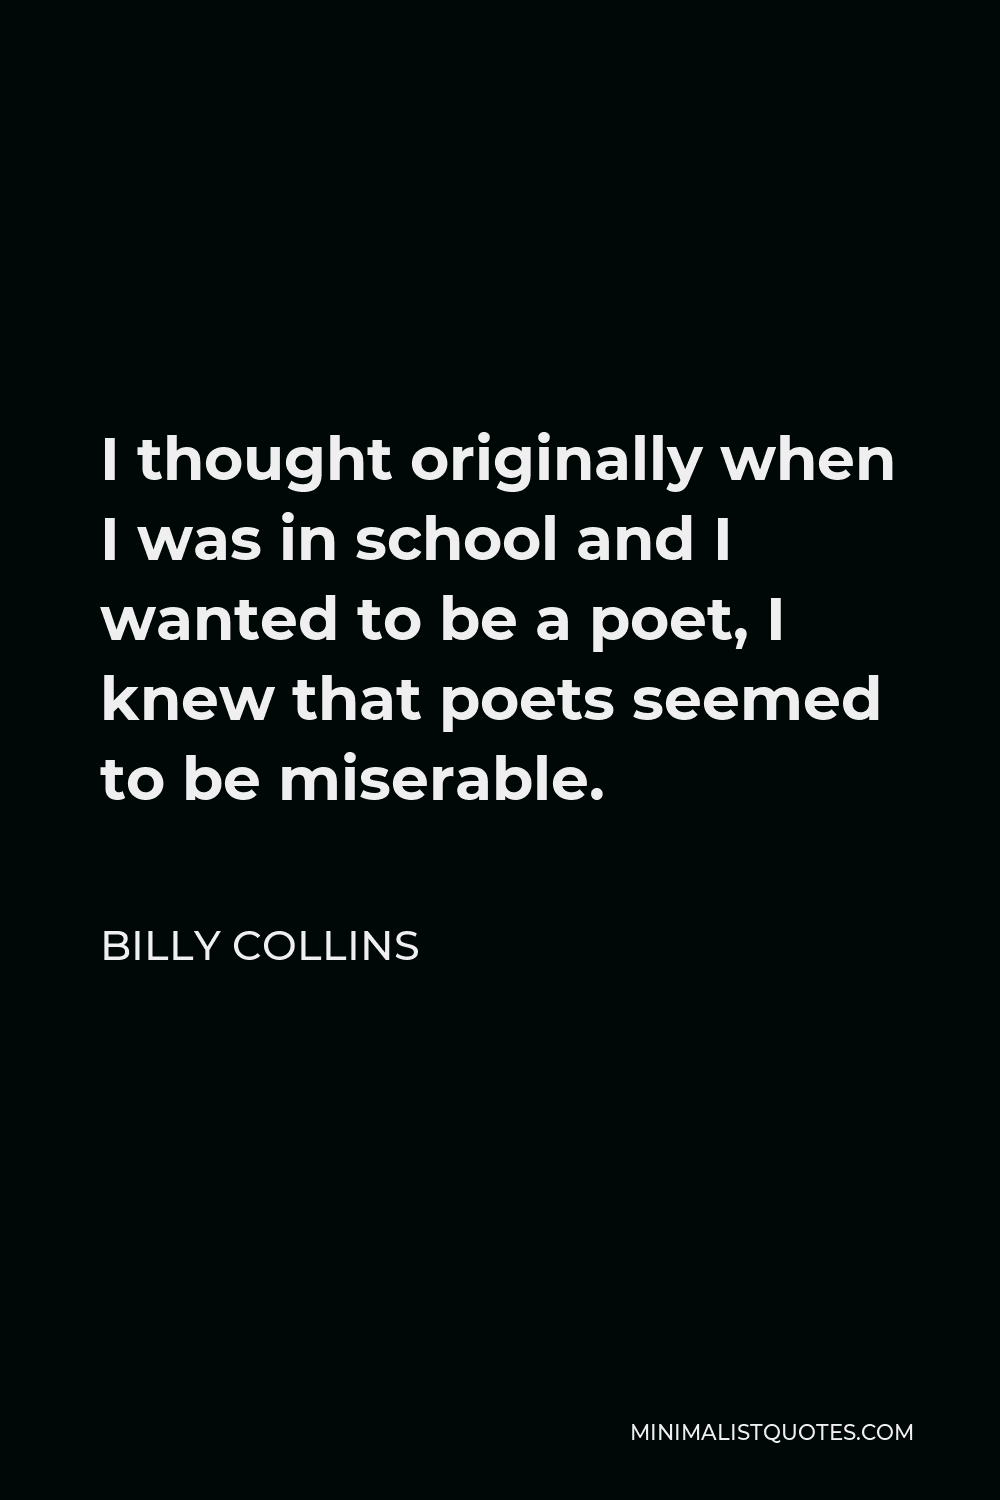 Billy Collins Quote - I thought originally when I was in school and I wanted to be a poet, I knew that poets seemed to be miserable.